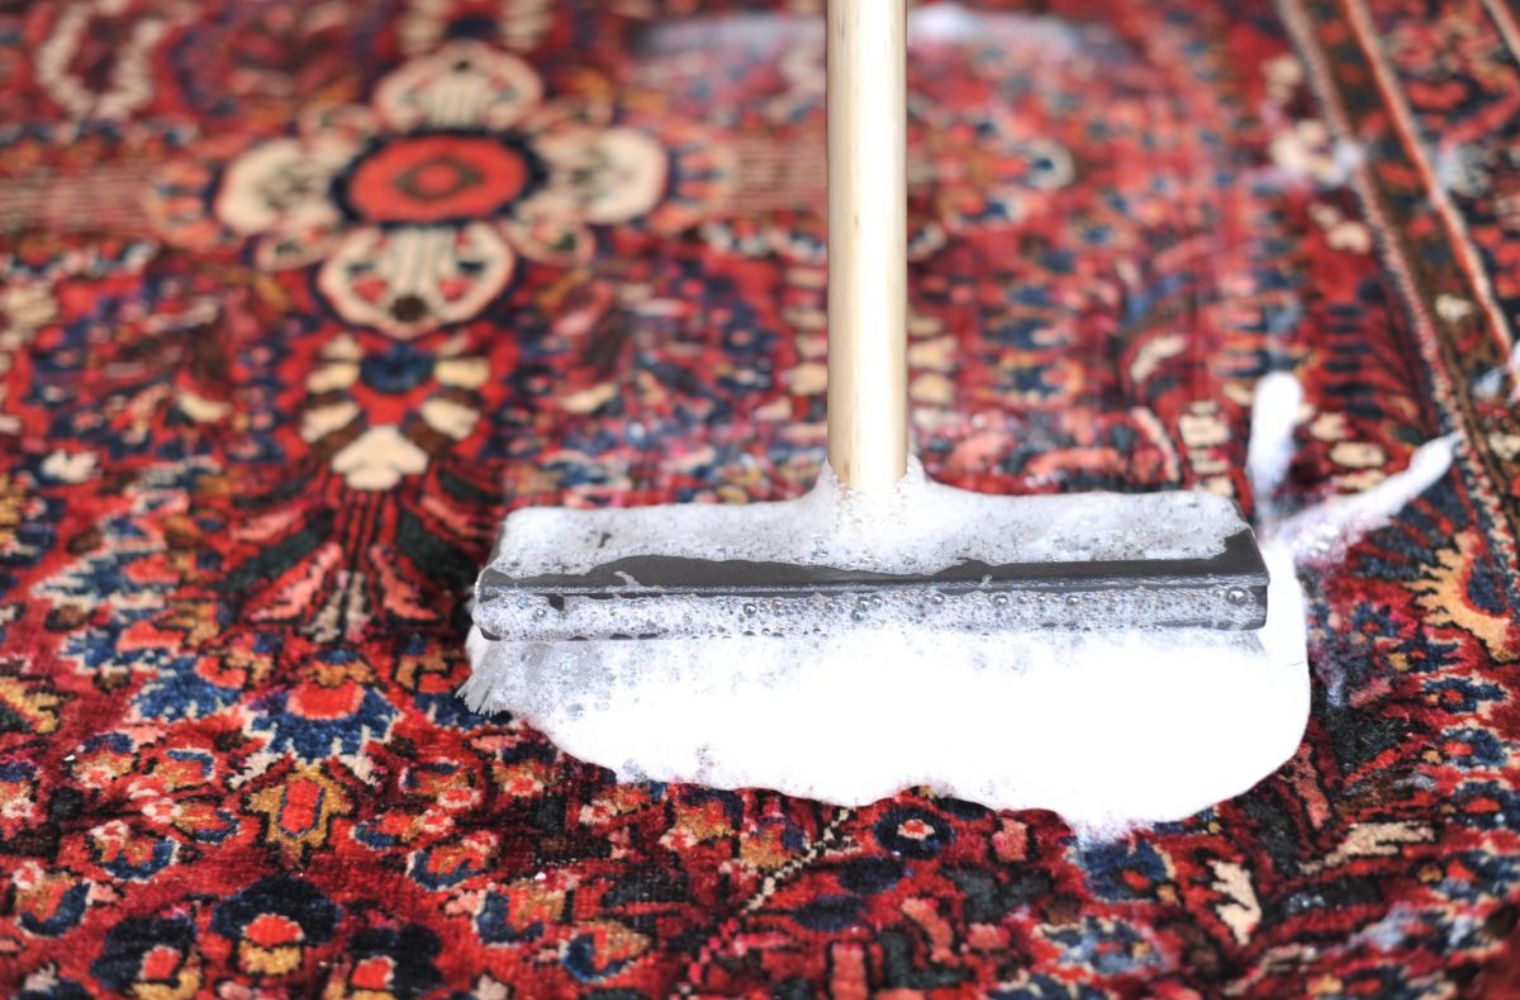 Scraping soapy water out of a rug at herbal washing facilities of Carpet Cellar